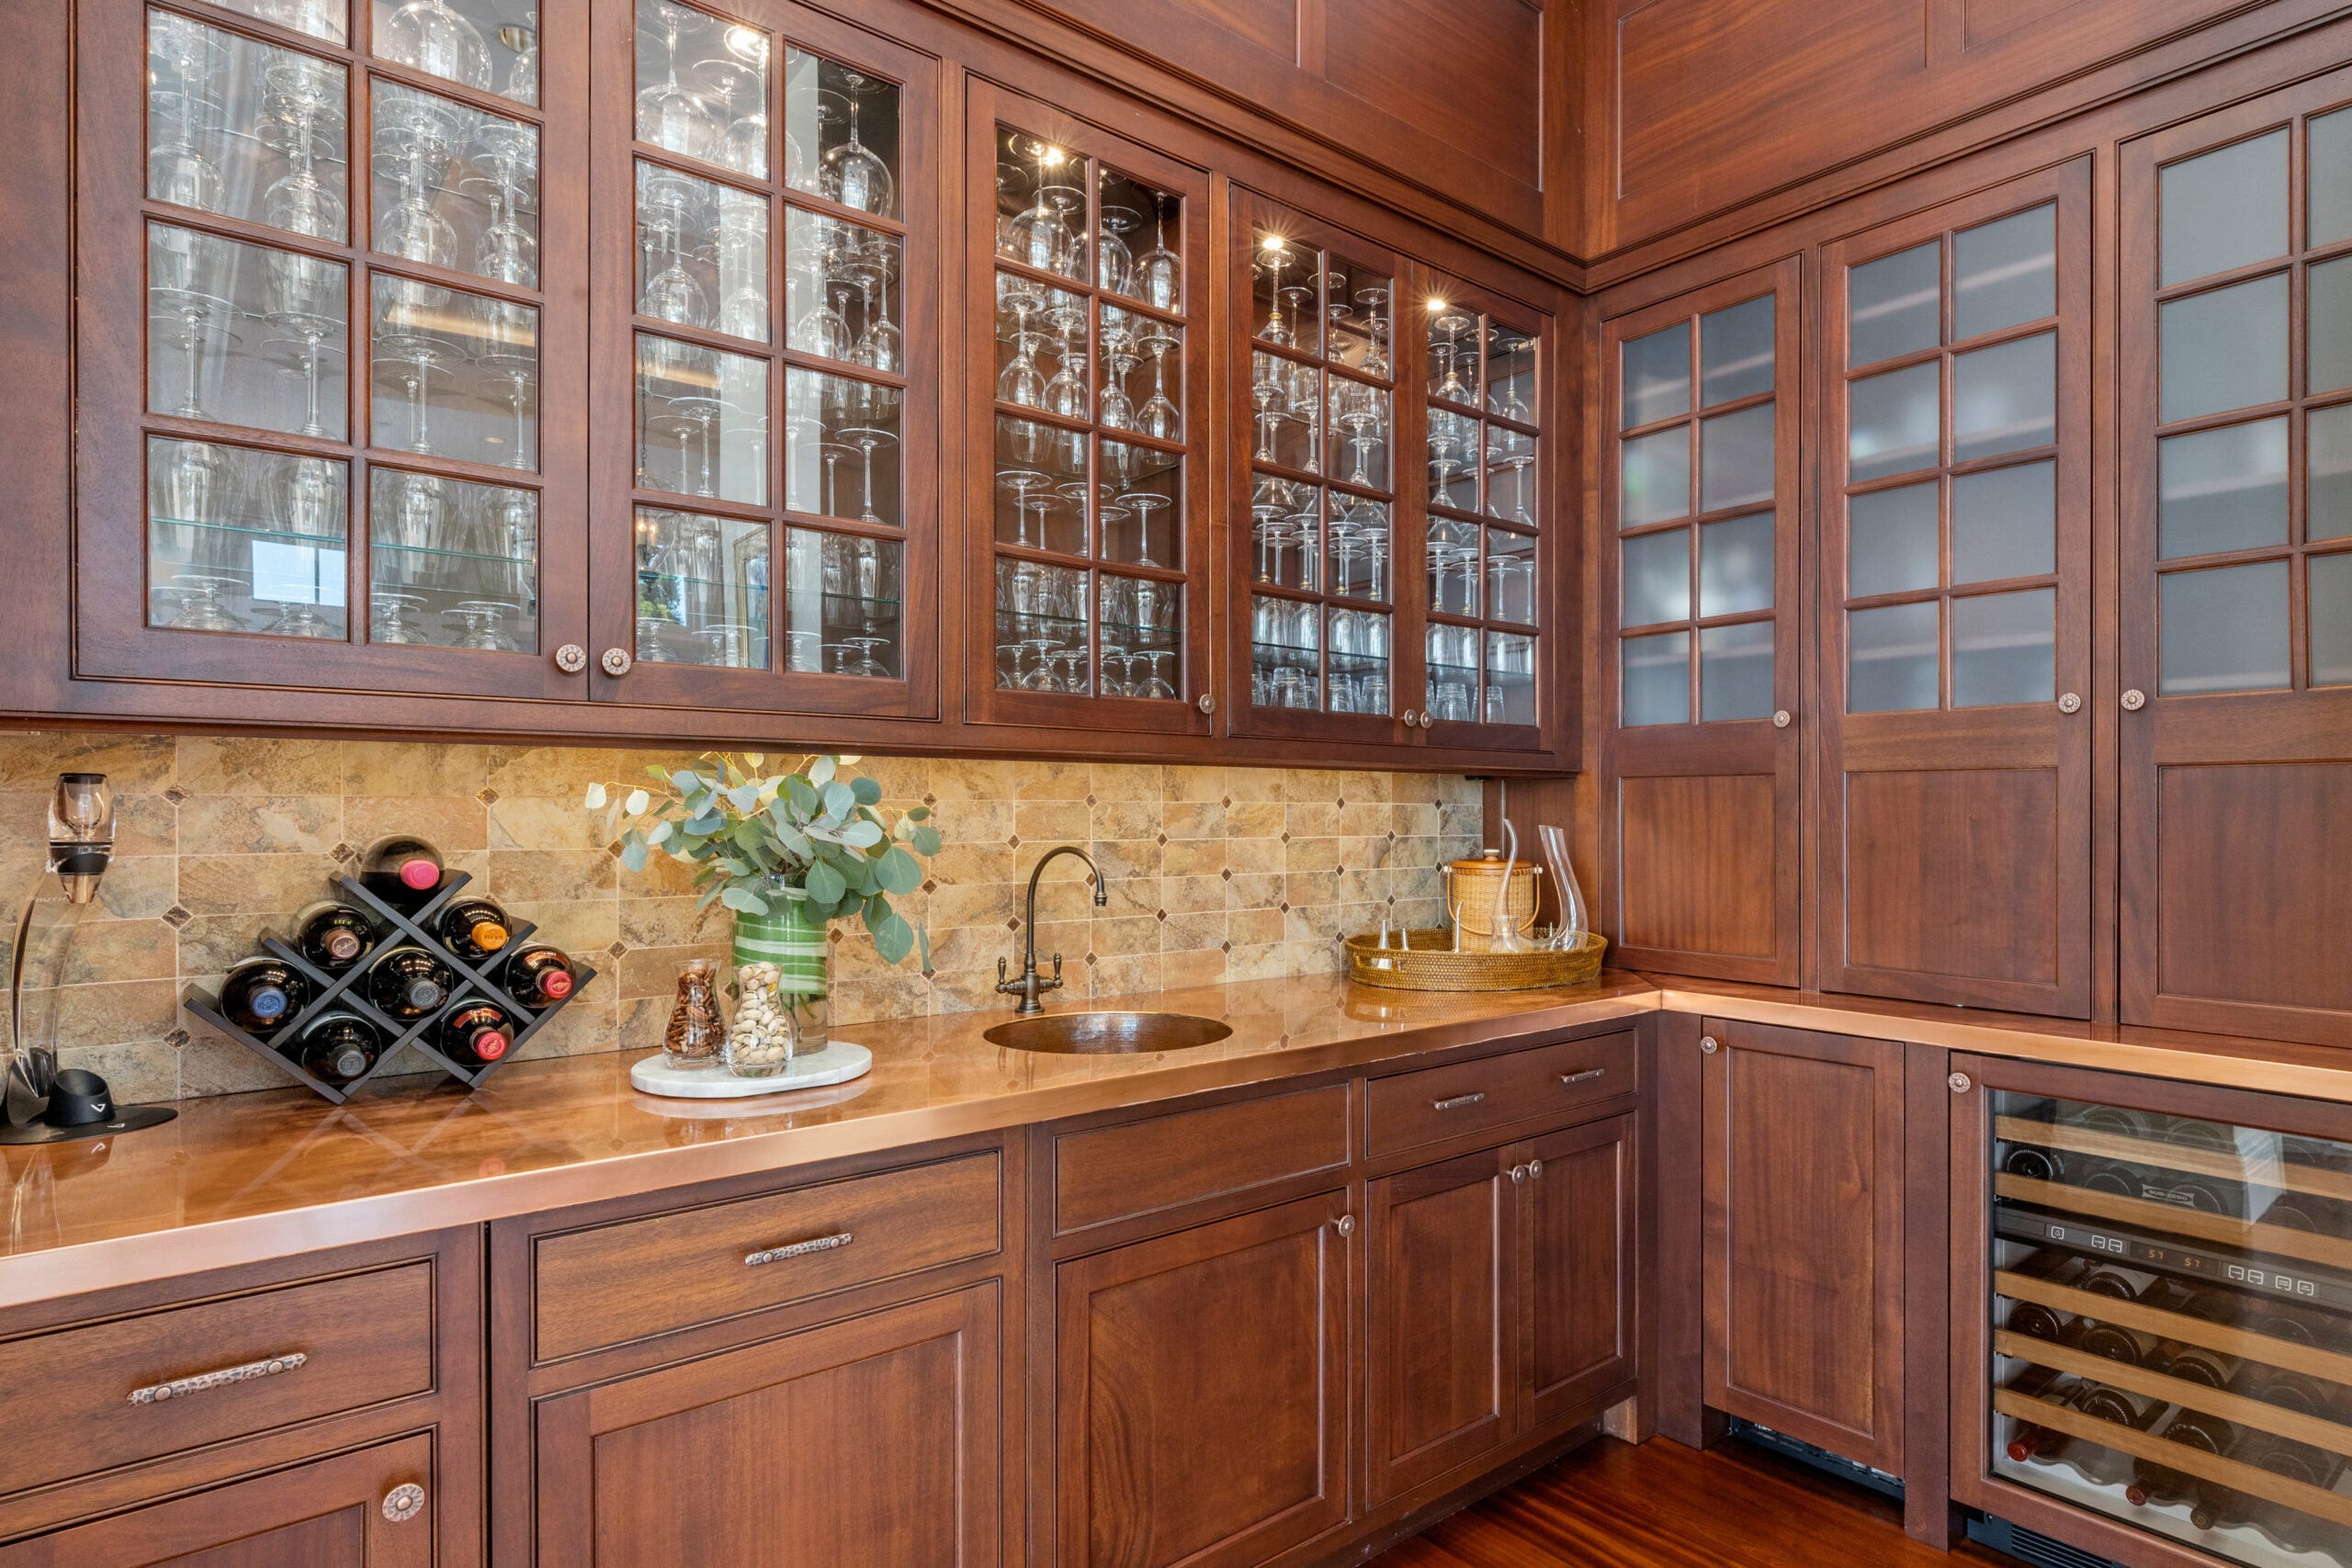 The butler's pantry has a mix of dark wood cabinetry with wood and glass (smokey or clear) doors. The countertop is glossy and bronze-colored. There is a small oval sink, myriad wine glasses behind the clear-glass doors, a sandy-colored tile backsplash with inlays, and a wine chiller.